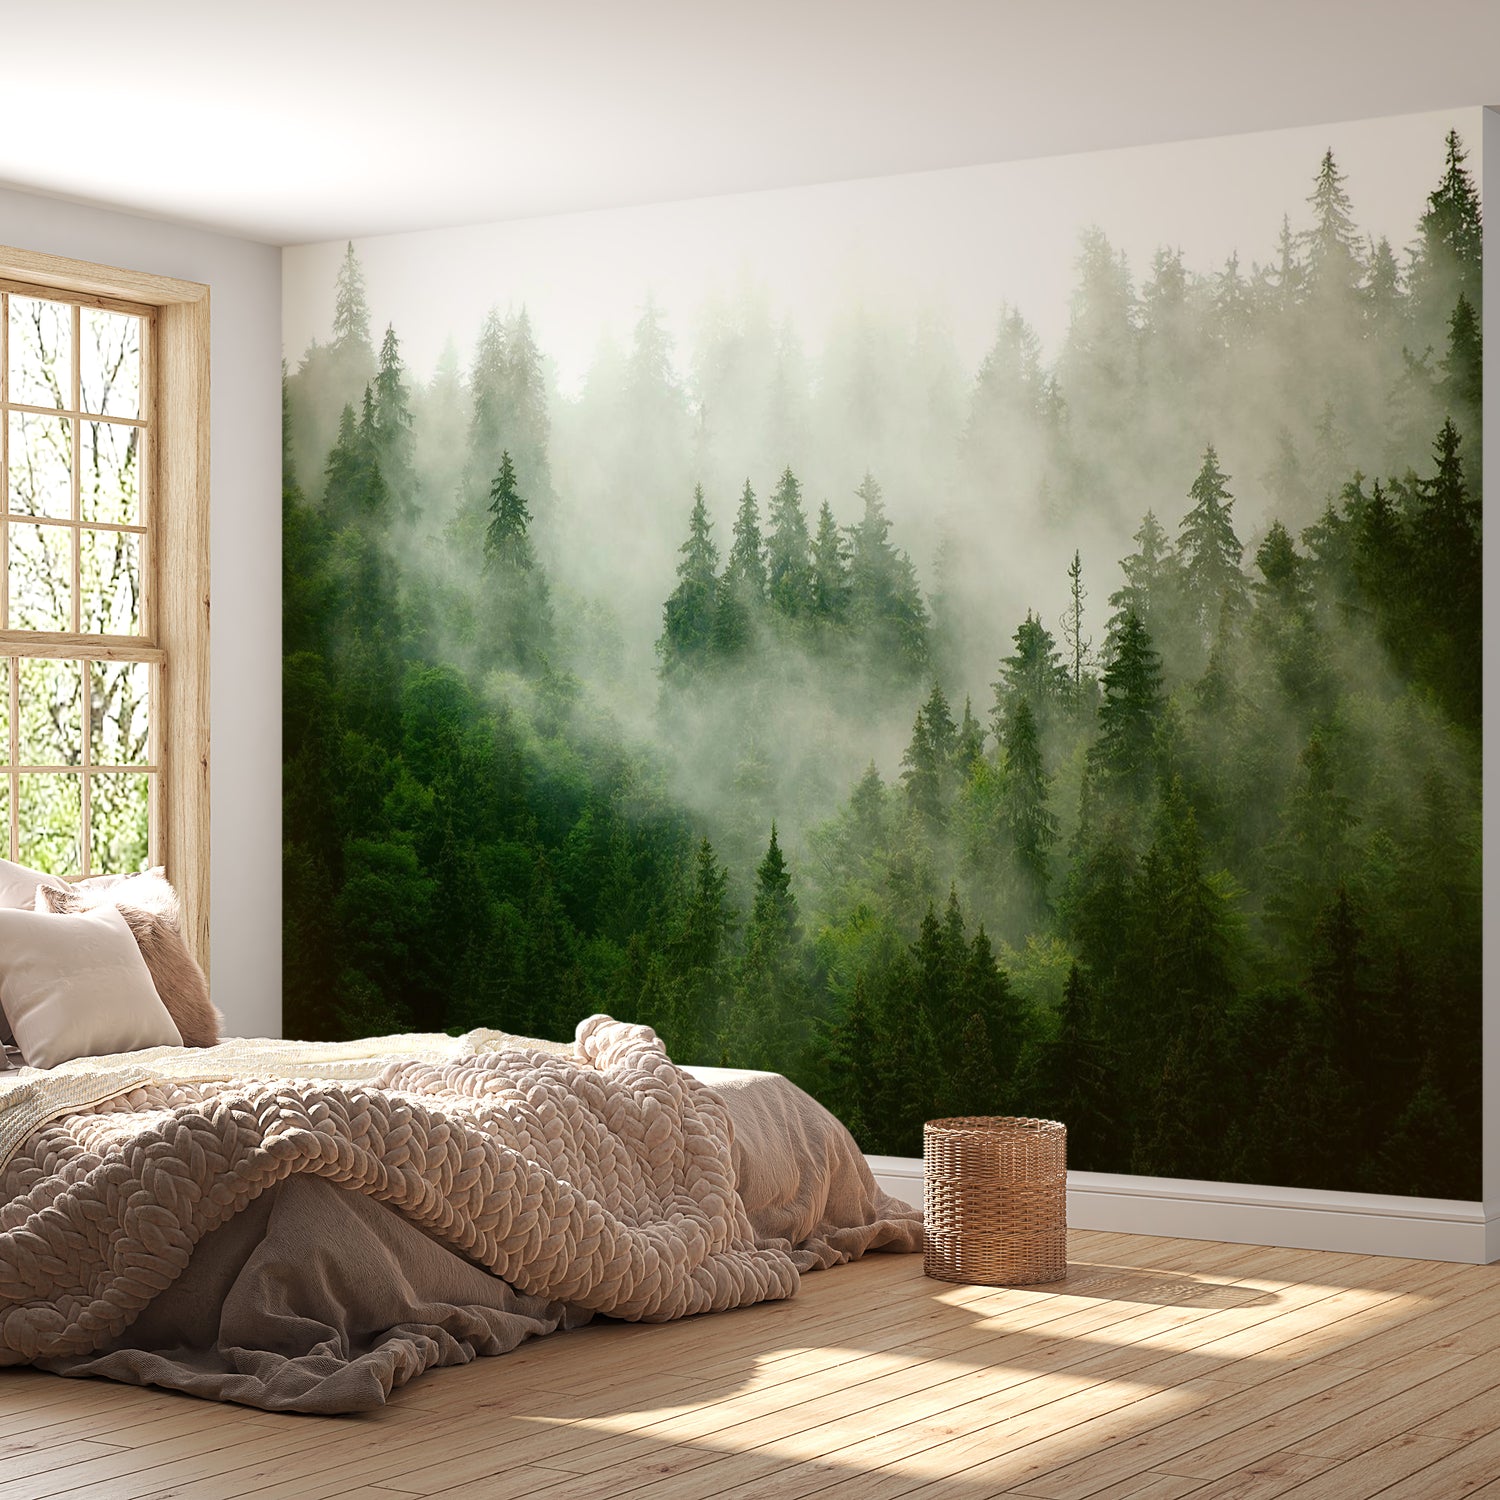 Peel & Stick Nature Wall Mural - Green Mountain Mist - Removable Wall Decals